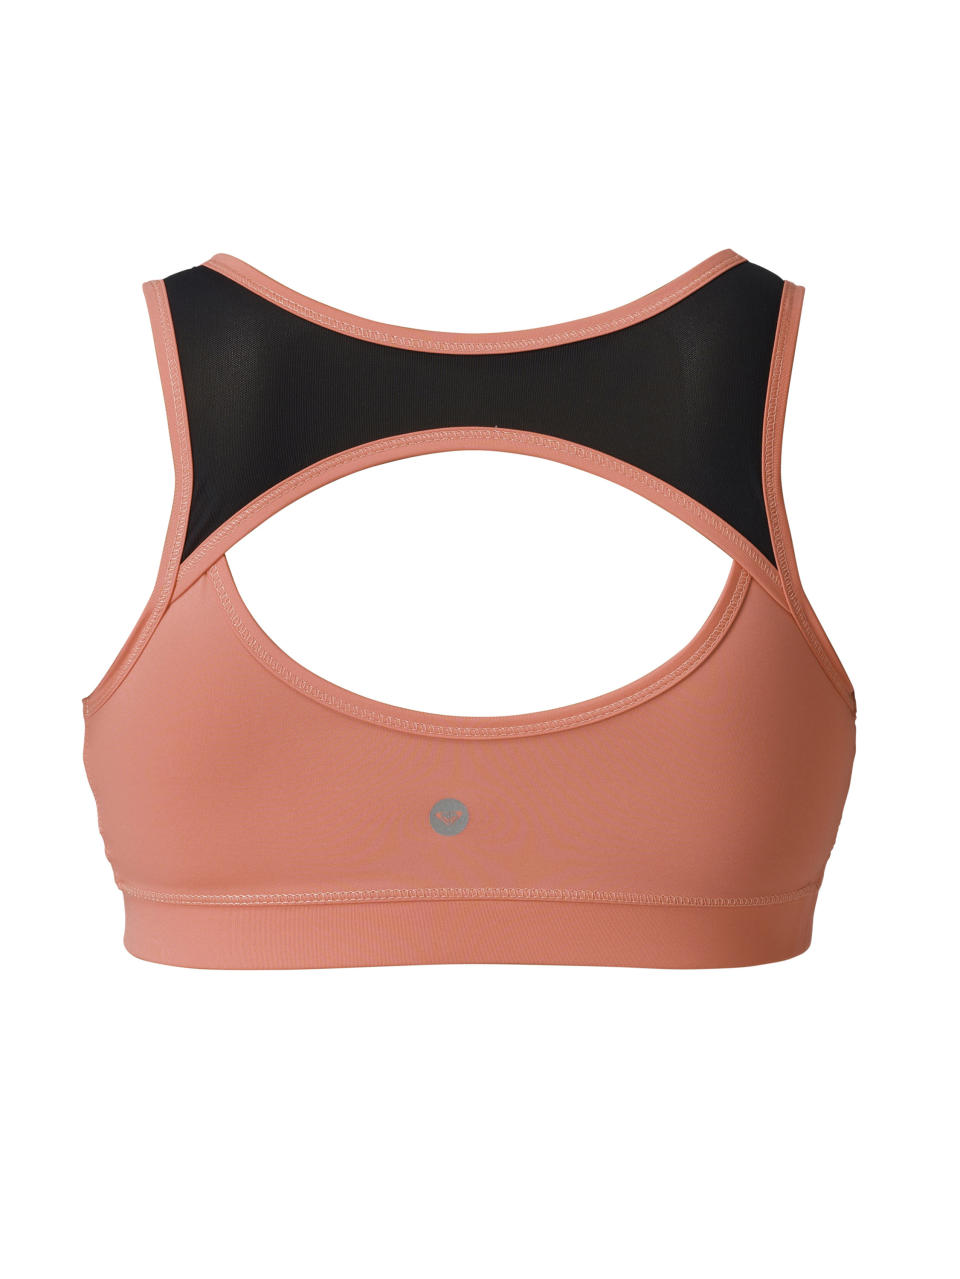 This product image released by Roxy Outdoor Fitness shows the back of a ladies Roxy Spin Bra. Participation in mud runs and obstacle courses, such as the Warrior Dash or Tough Mudder, is growing by leaps and bounds. The right clothes and gear could be the difference in performance and comfort. (AP Photo/Roxy Outdoor Fitness)